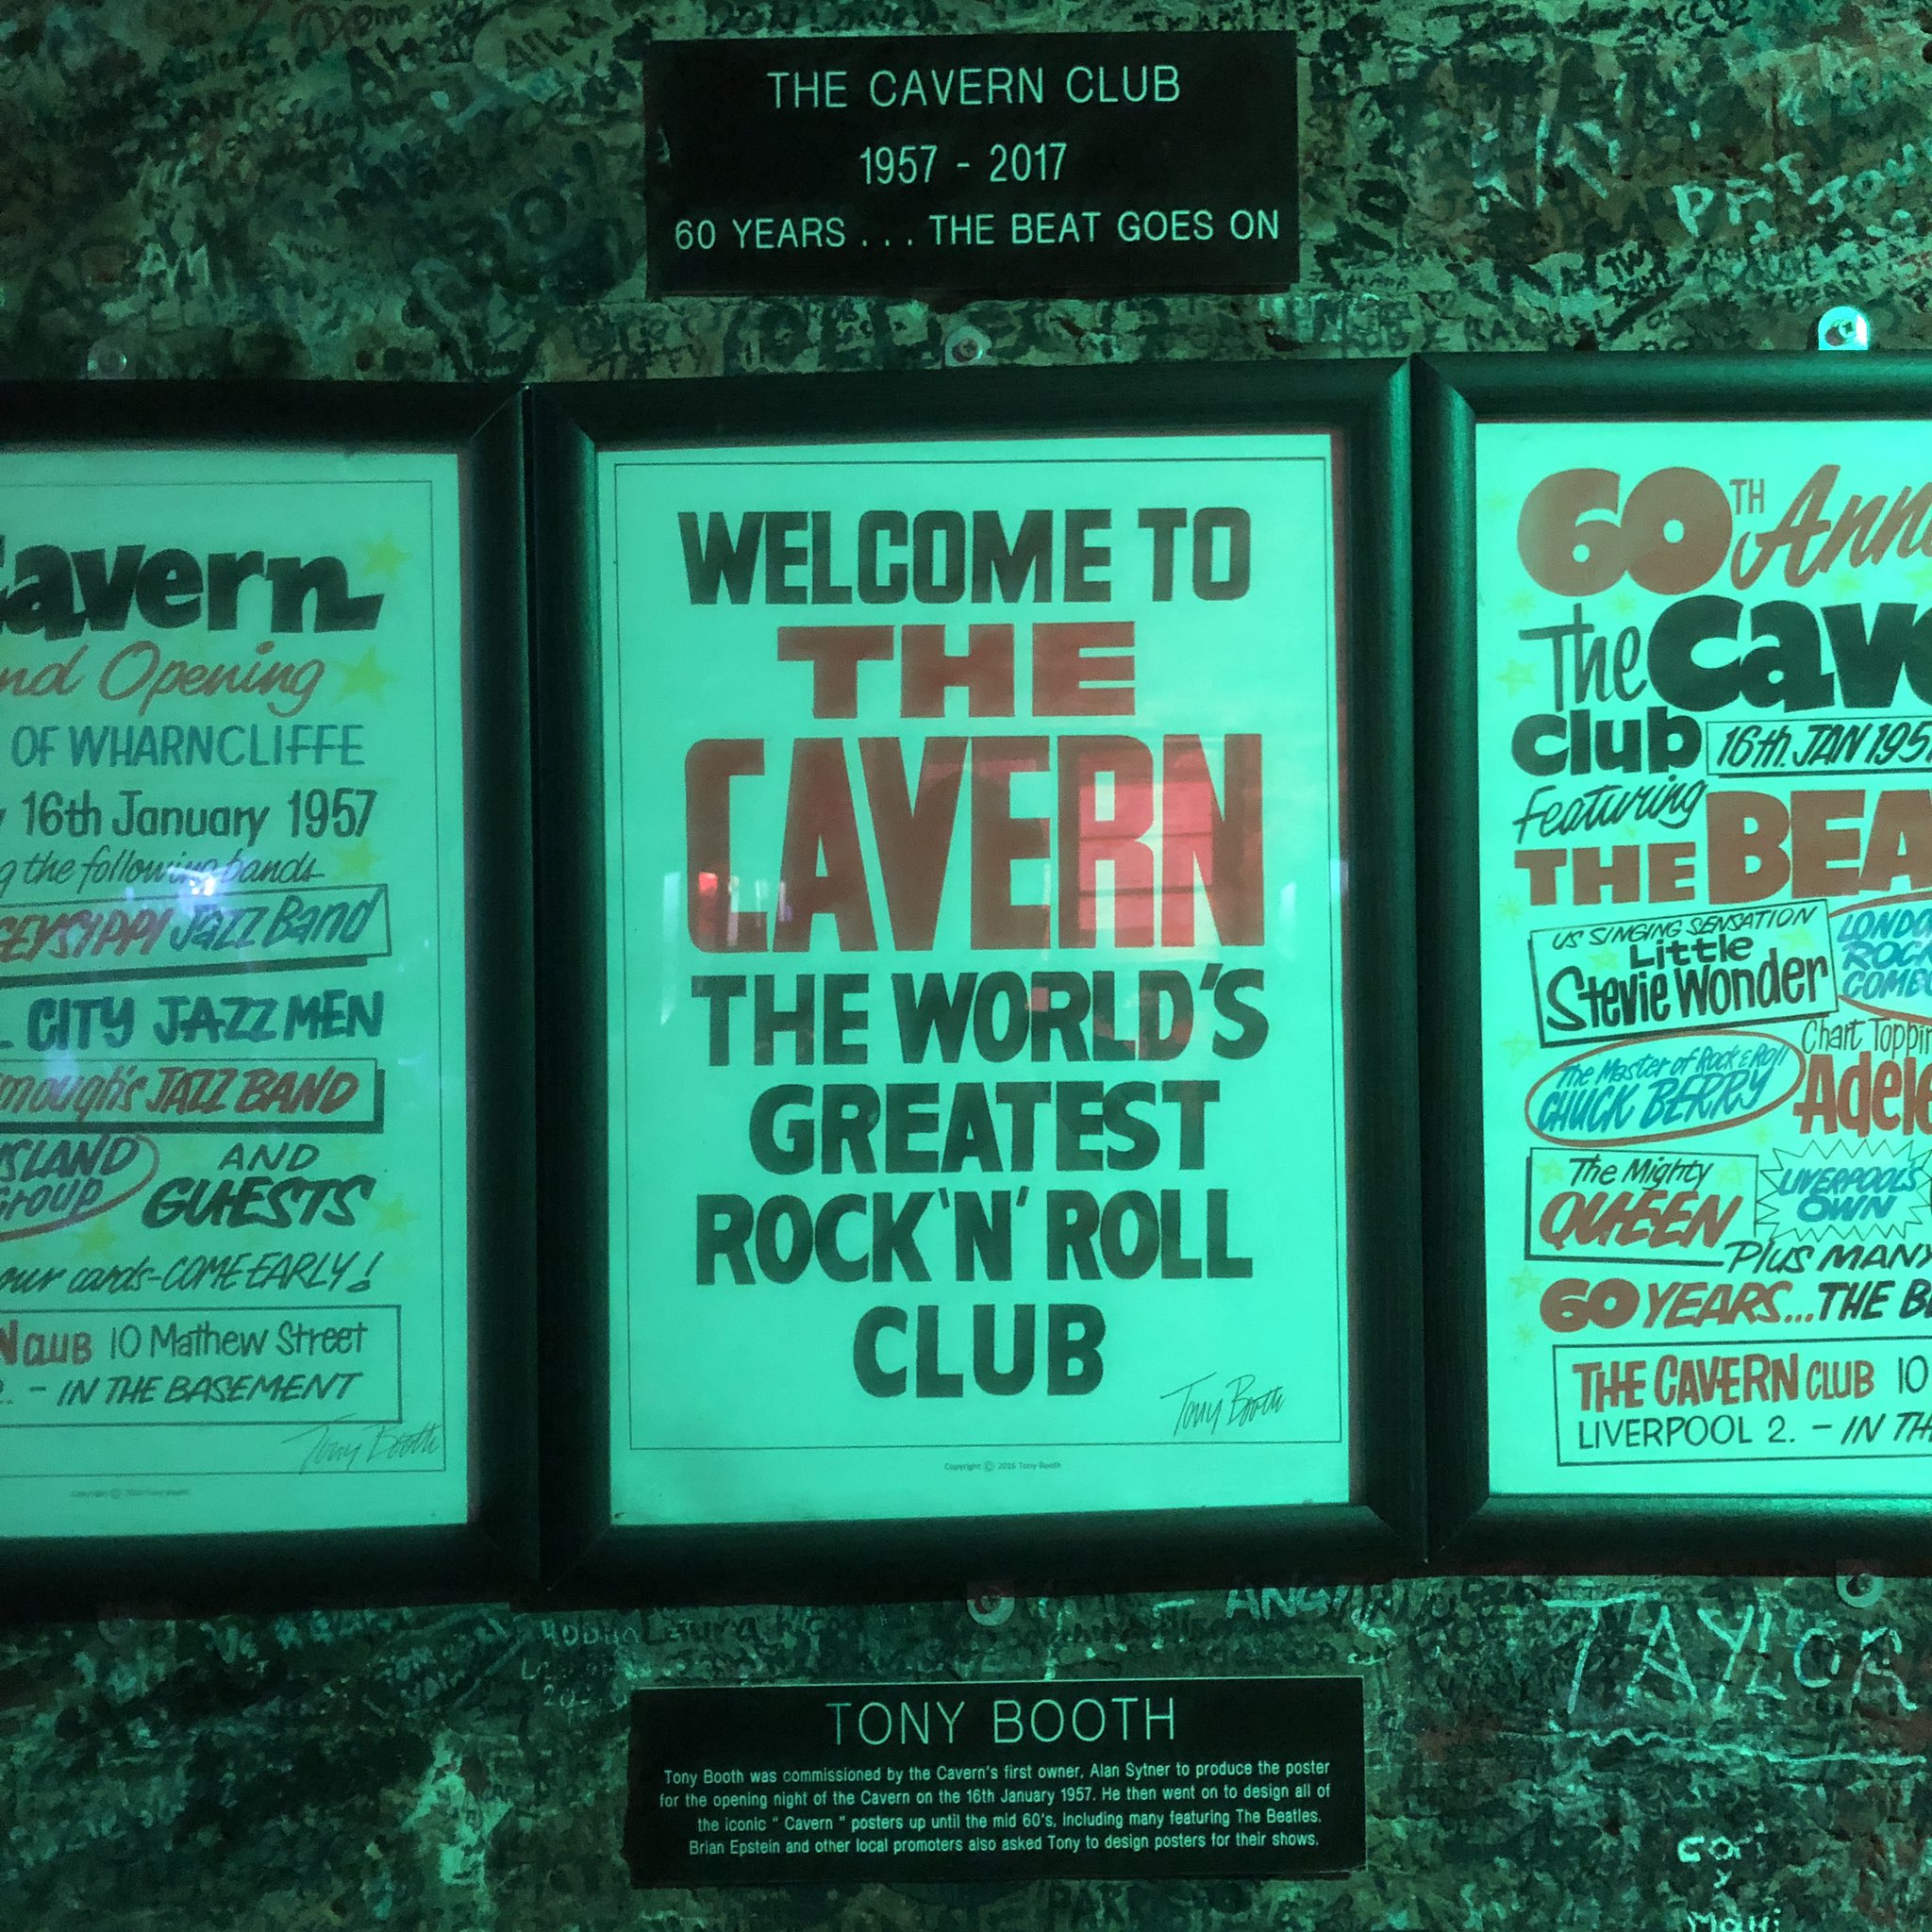 Framed posters on a wall. The middle one says: welcome to the cavern the world’s greatest rock ‘n’ roll club. A small plaque below it says they were designed by Tony Booth. The brick wall in the background is completely covered in signatures. The room is quite dark but bathed in cool, blue light.